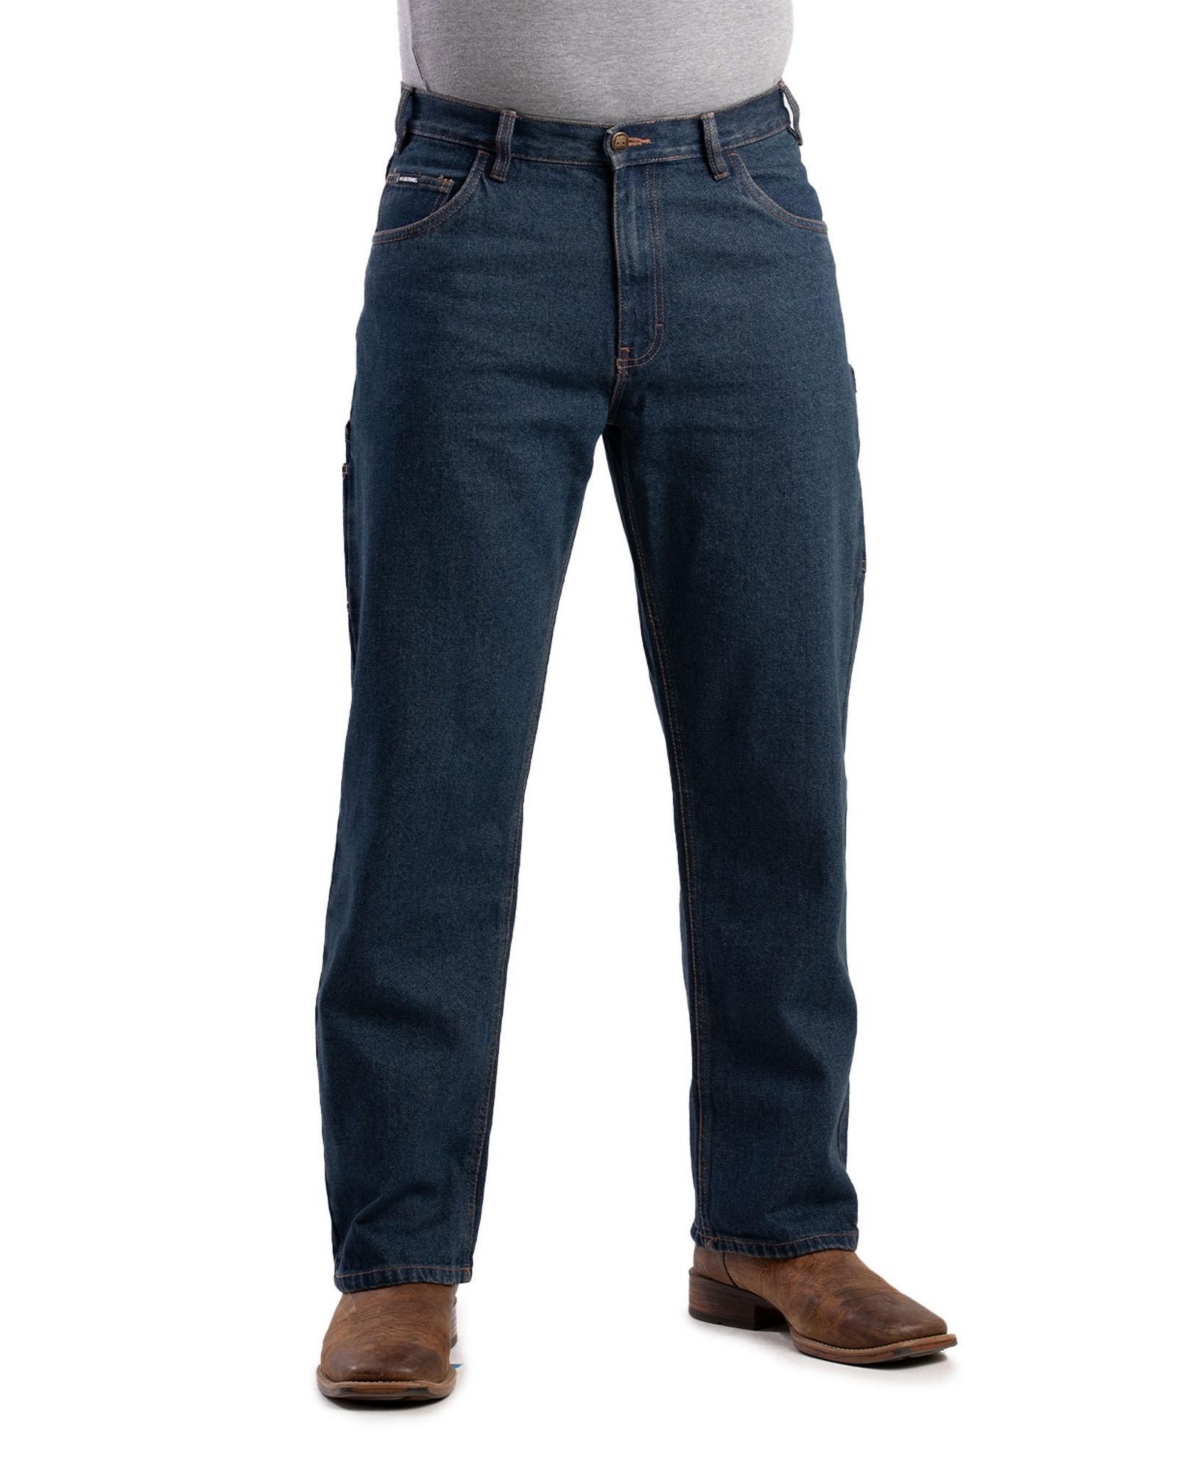 Men's Heritage Relaxed Fit Carpenter Jean - Classic stone wash